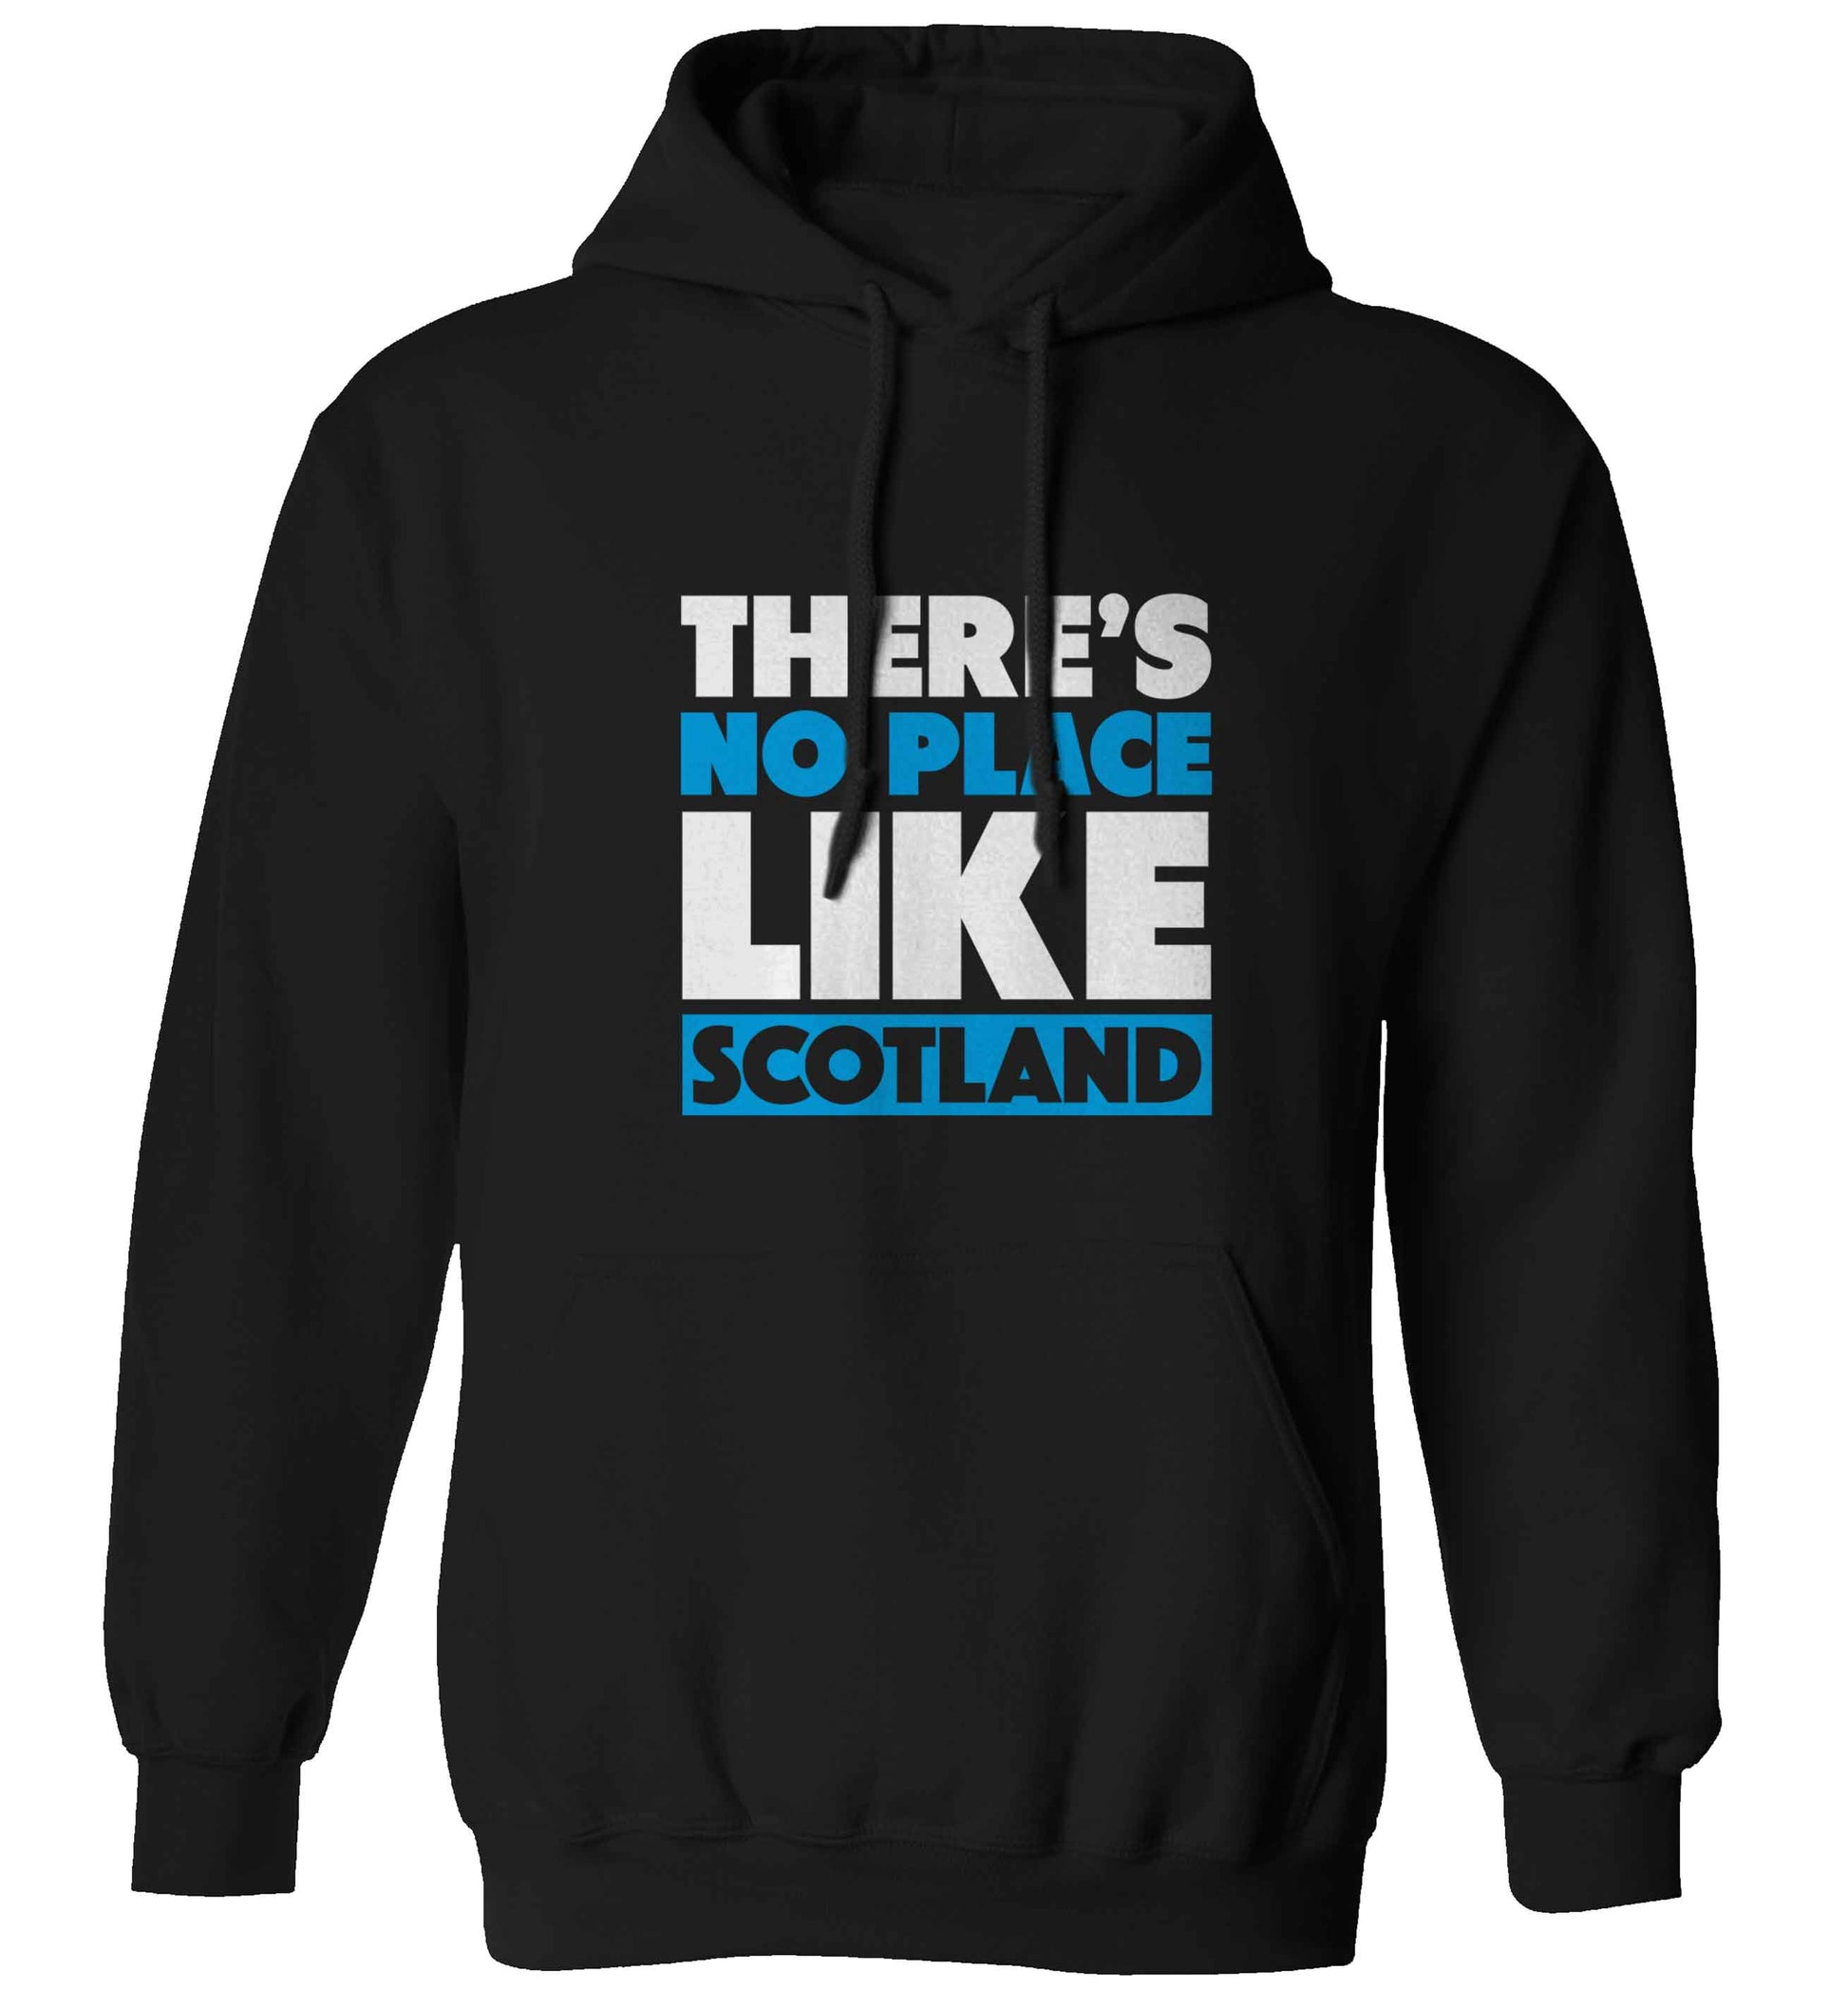 There's no place like Scotland adults unisex black hoodie 2XL